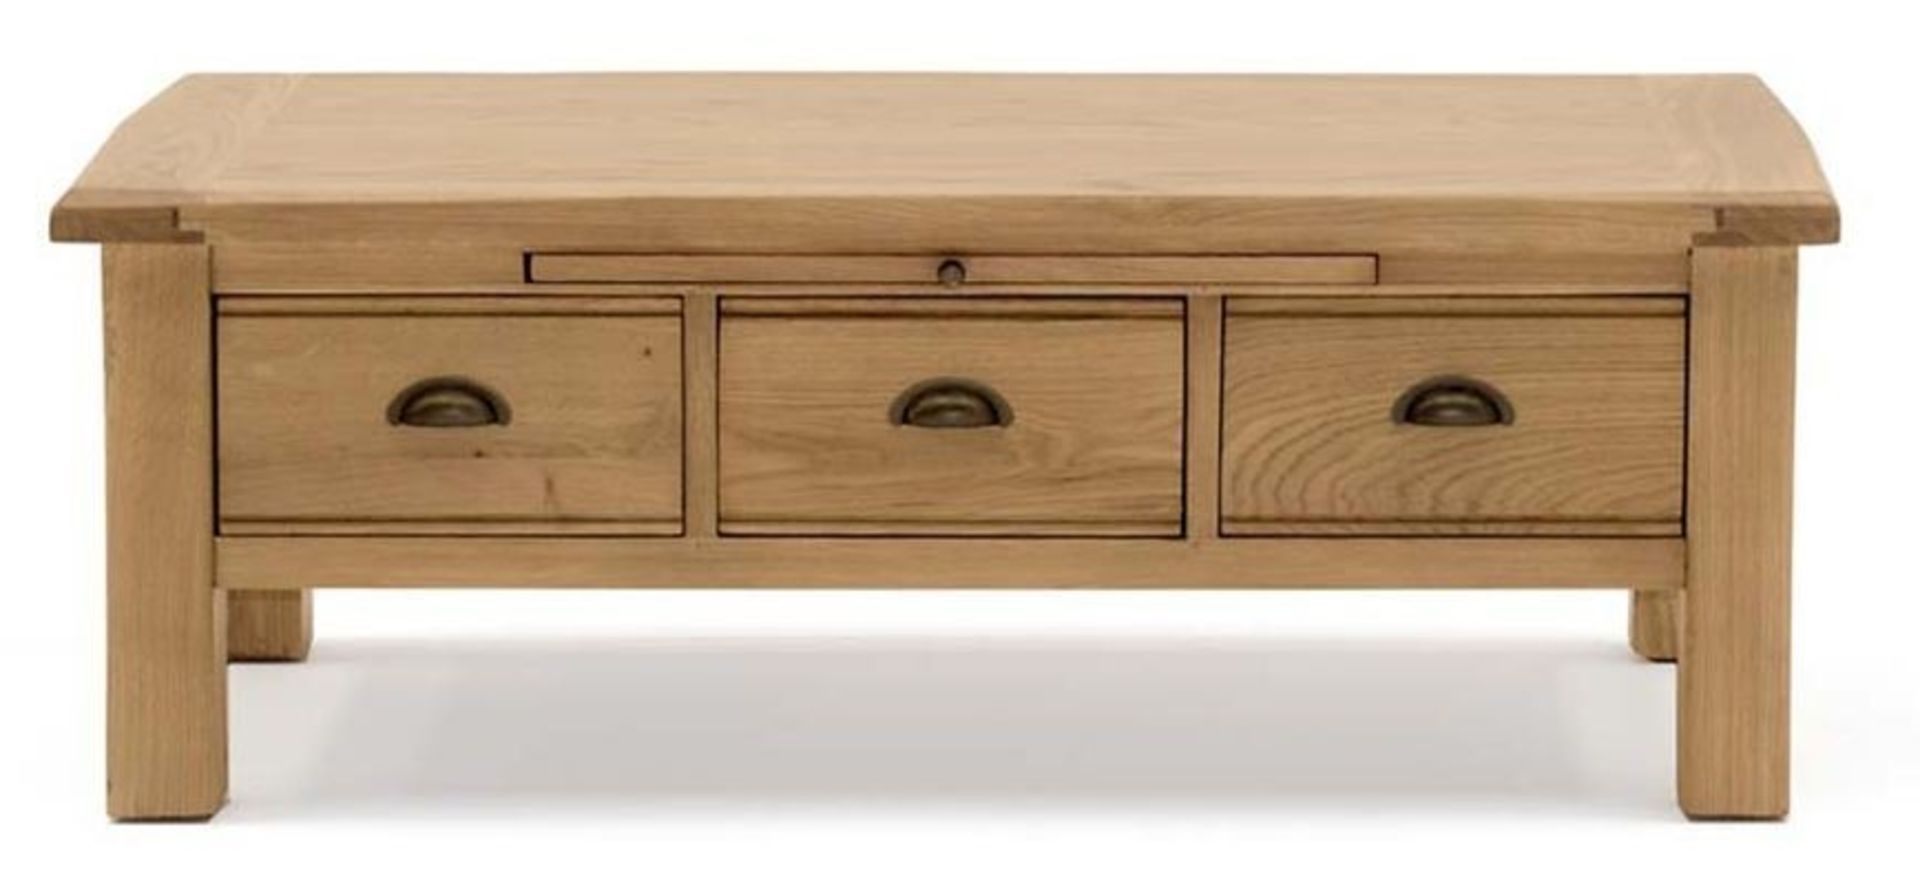 1 GRADE A BOXED VIDA LIVING BREEZE STORAGE COFFEE TABLE IN OAK / RRP £294.00 (VIEWING HIGHLY